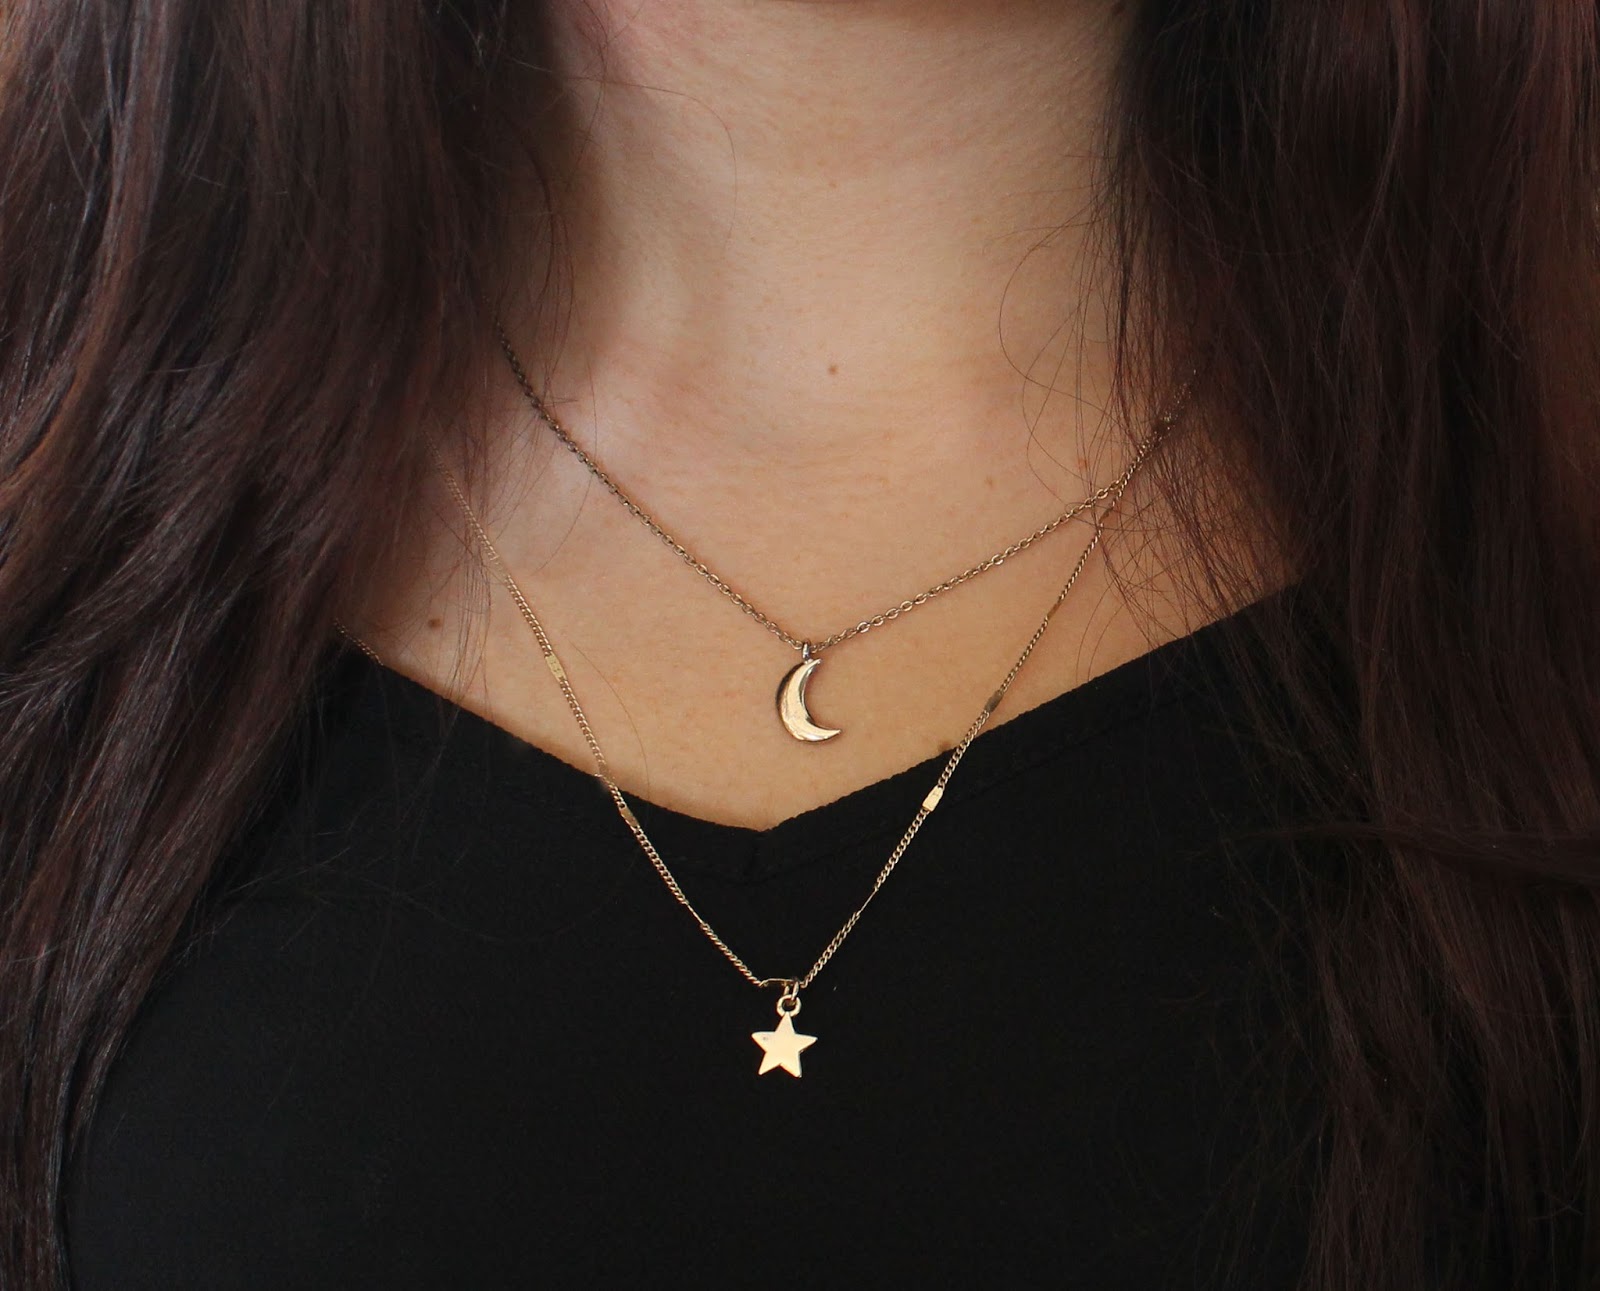 5 necklaces every girl should have